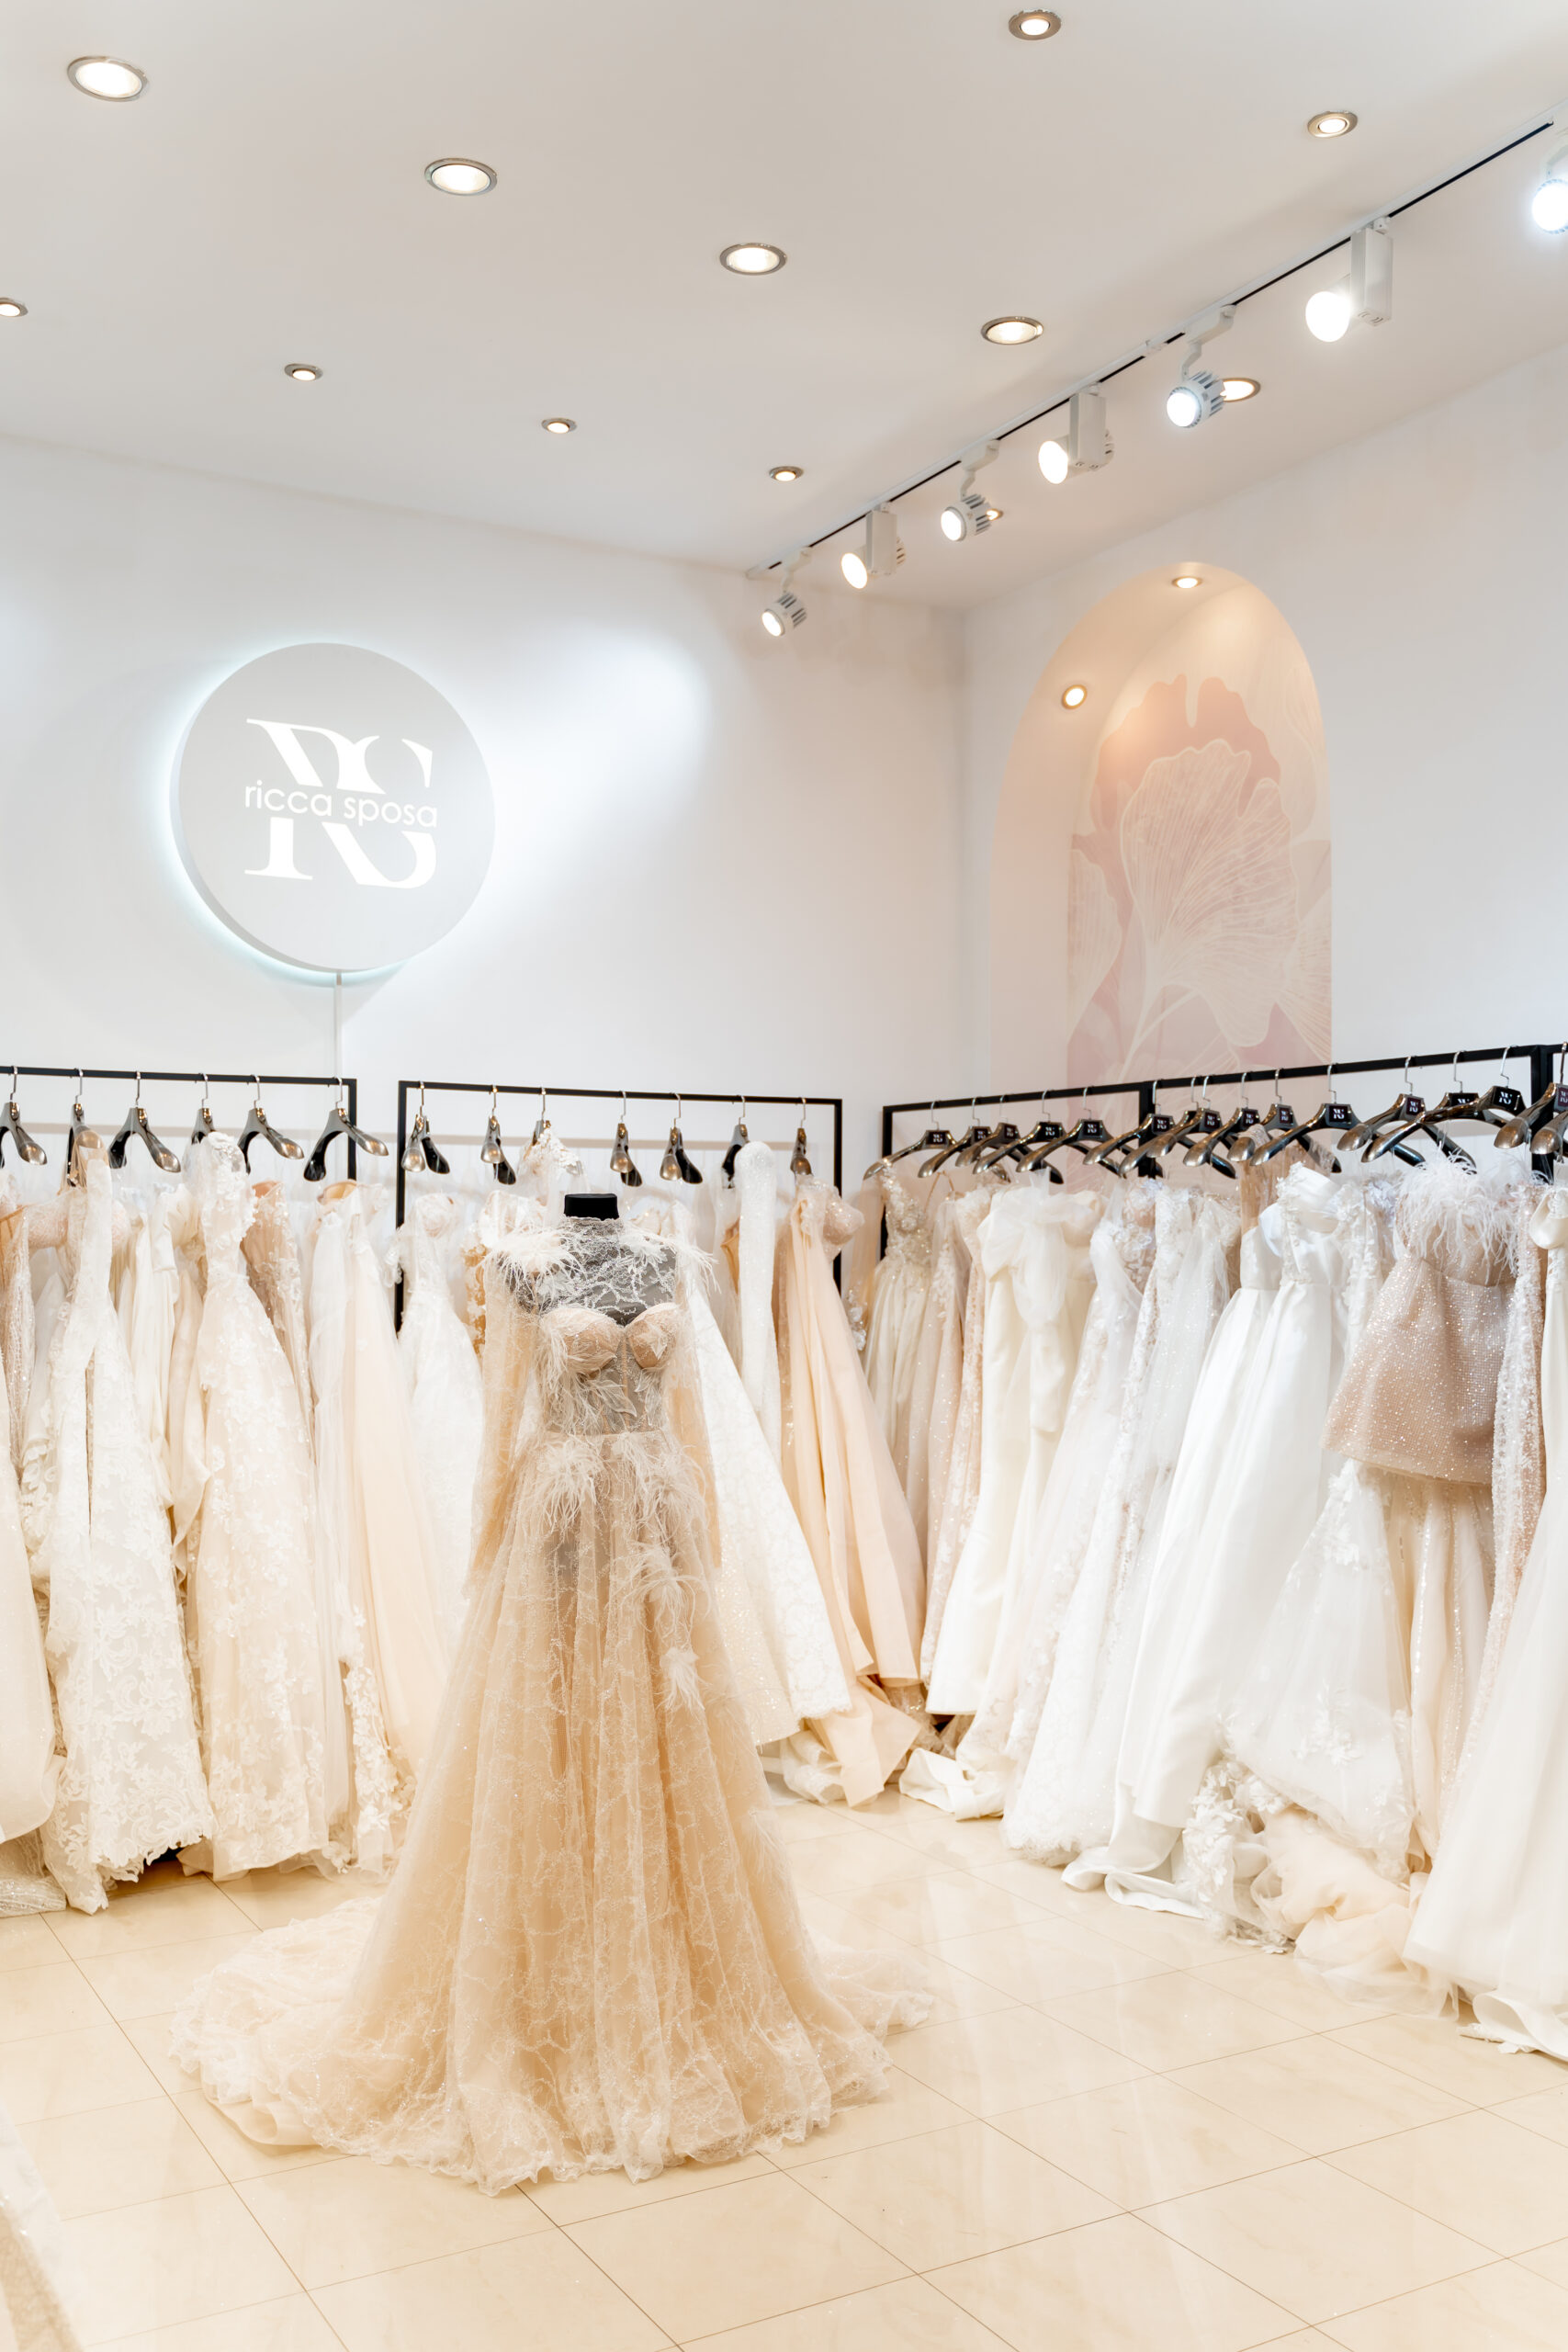 Grand Opening official Ricca Sposa boutique Welcomes Bucharest Brides